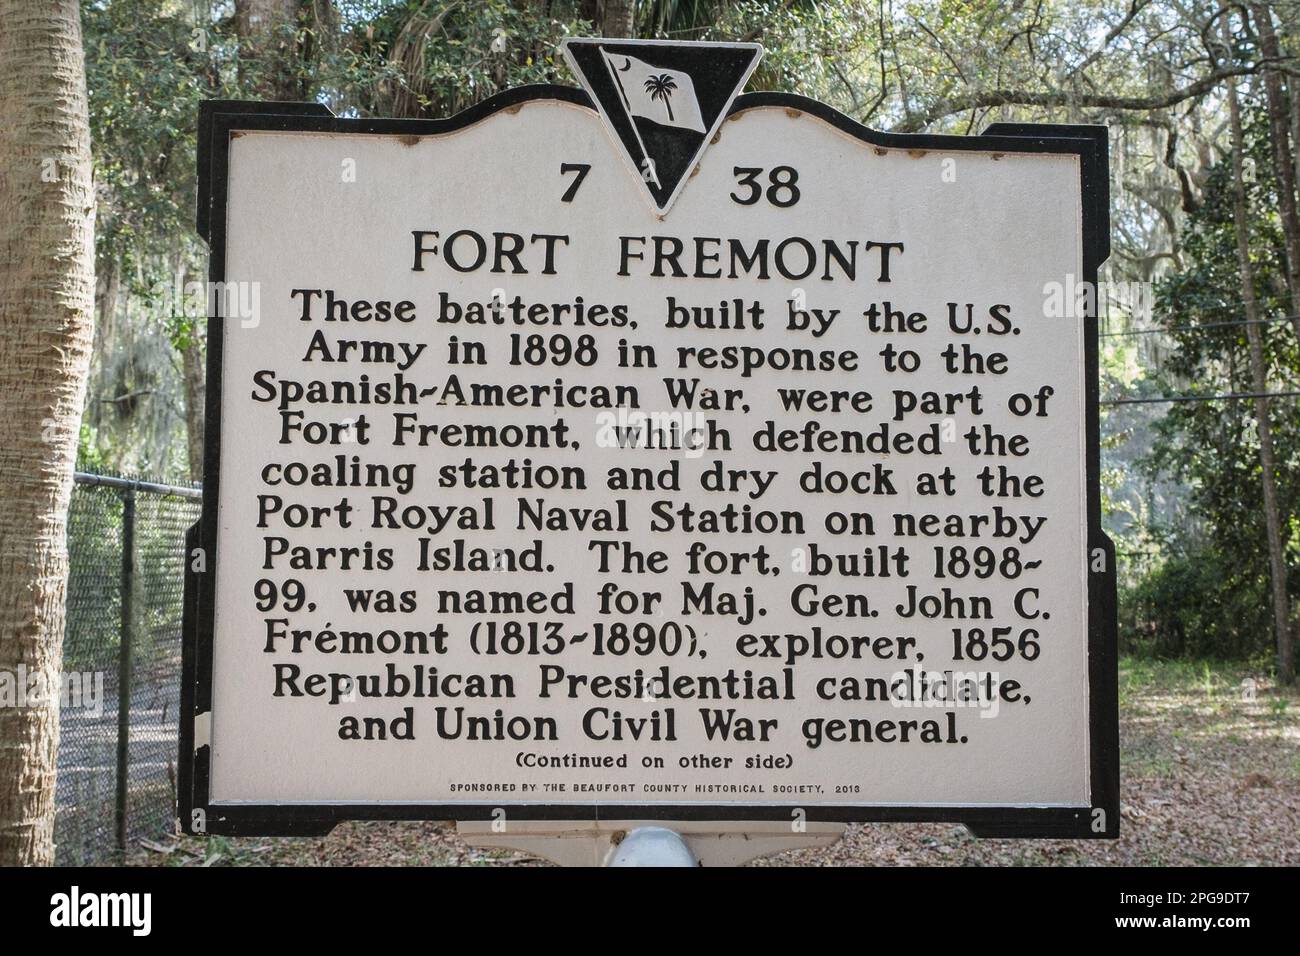 South Carolina state informational sign for Fort Fremont battery. Stock Photo